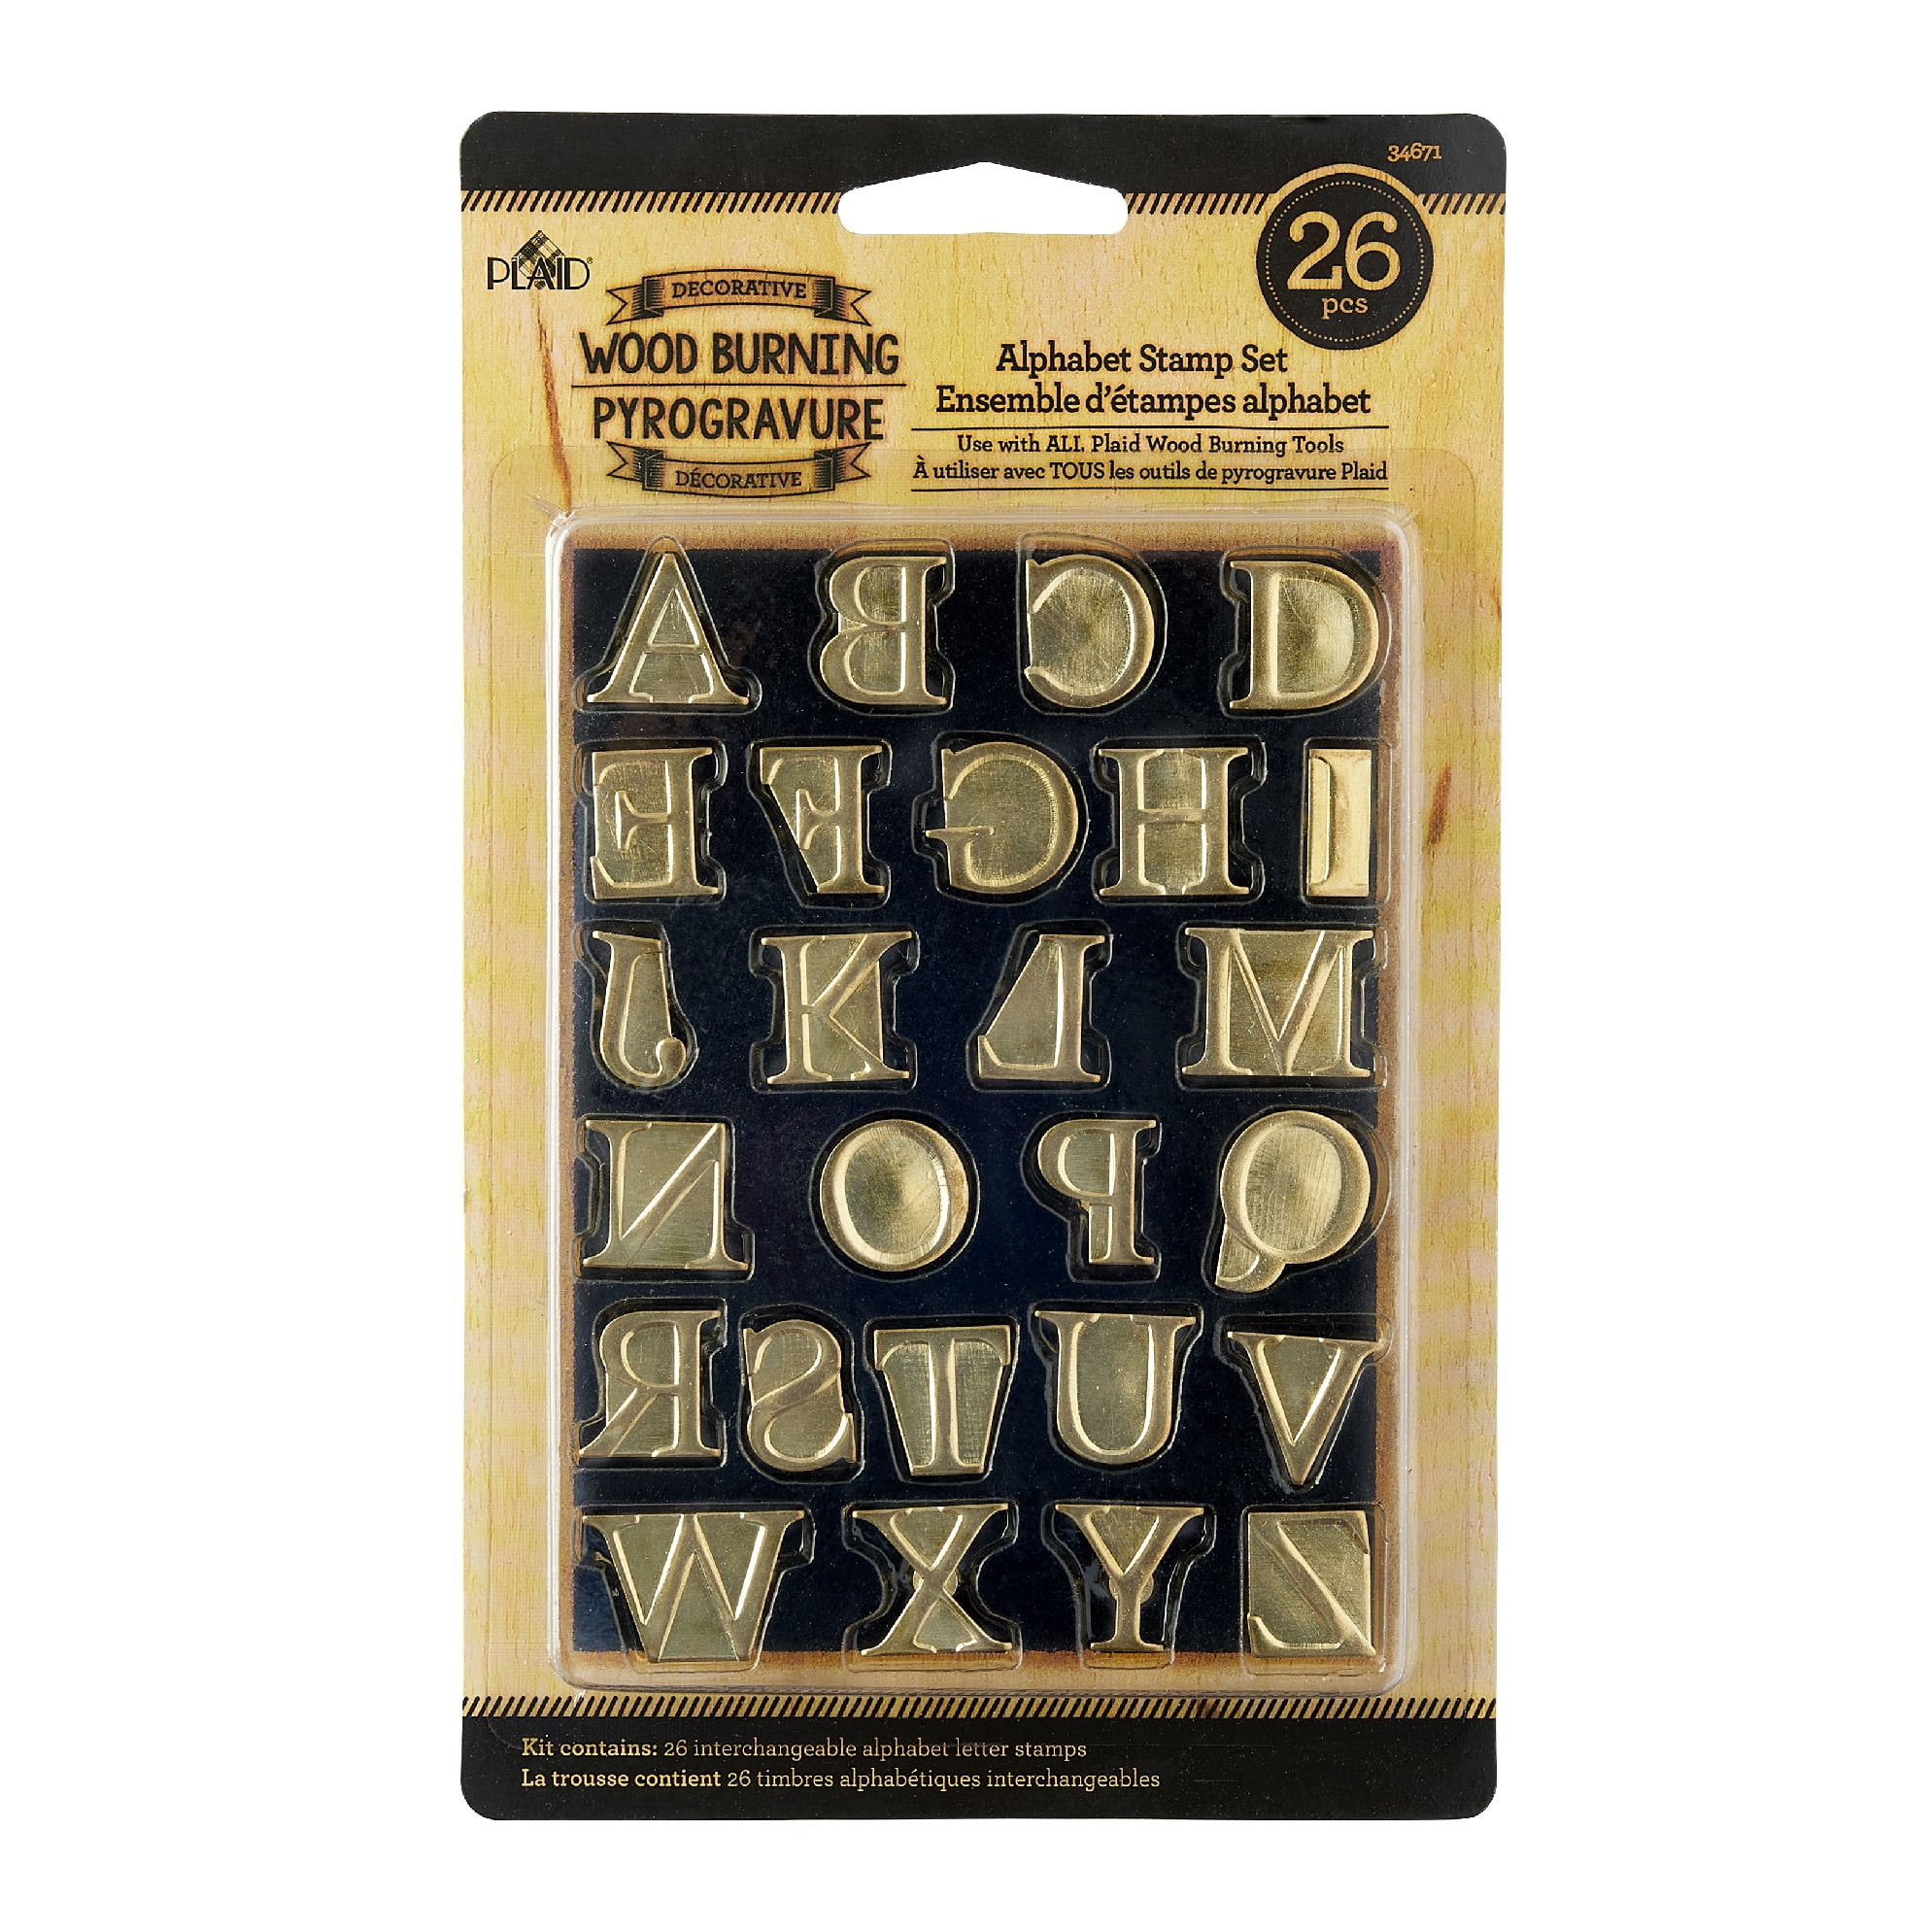 Original 1976 Alphabet Letters and Numbers Hot Peel Iron On Transfer Black 